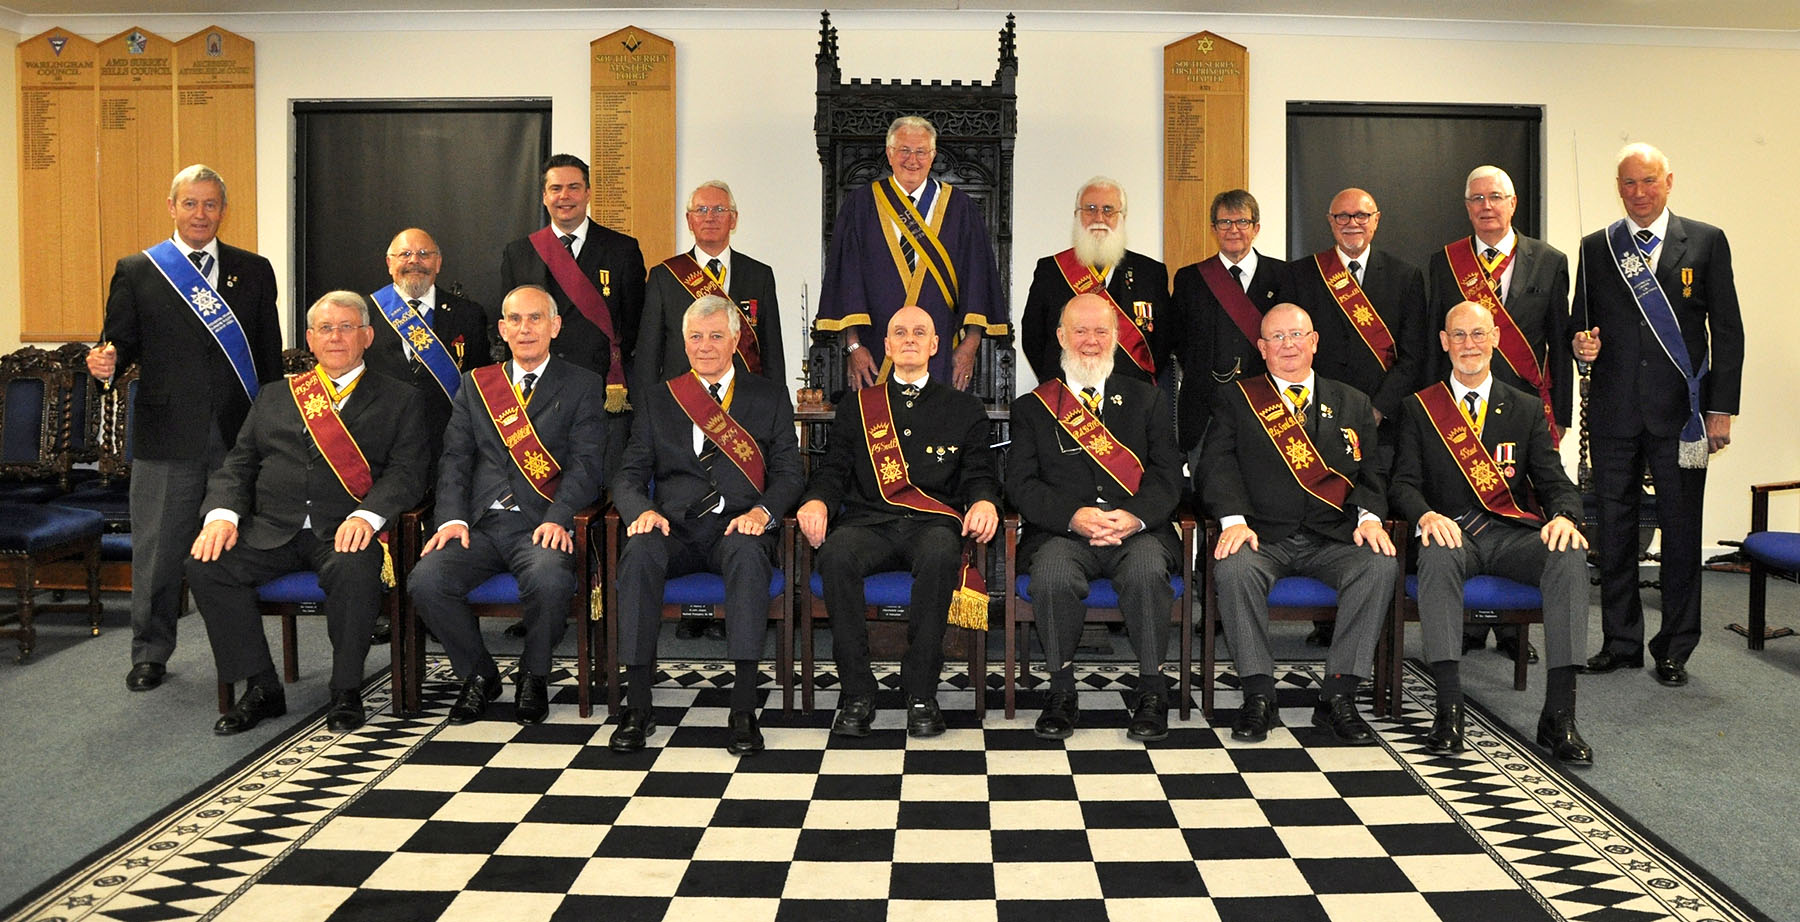 The April Meeting of Warlingham Conclave